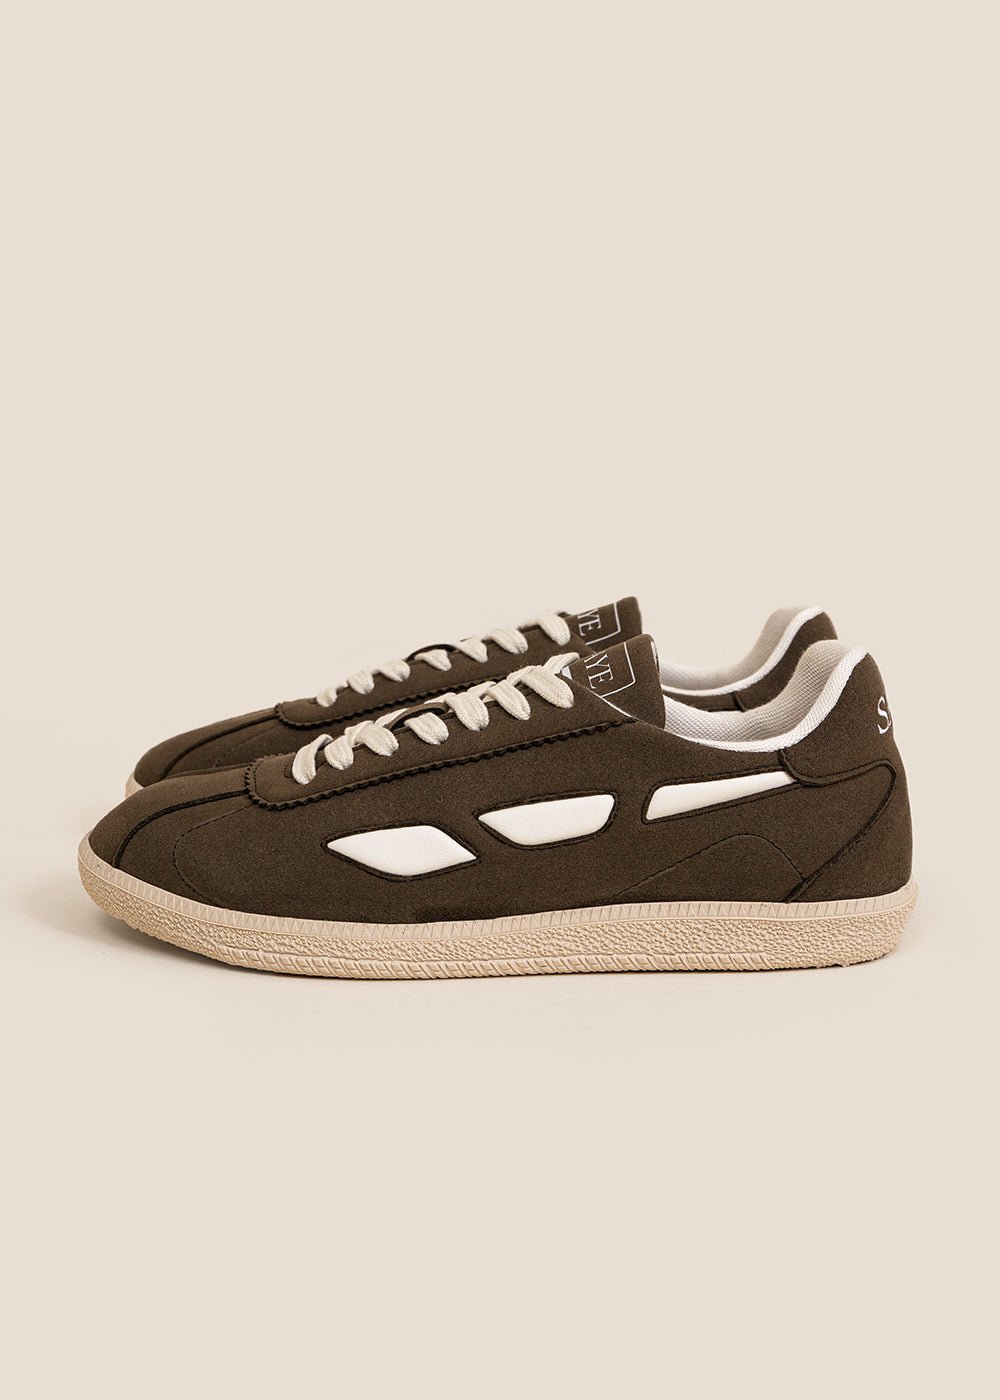 SAYE Olive Green Vegan Modelo '70 Sneakers - New Classics Studios Sustainable Ethical Fashion Canada